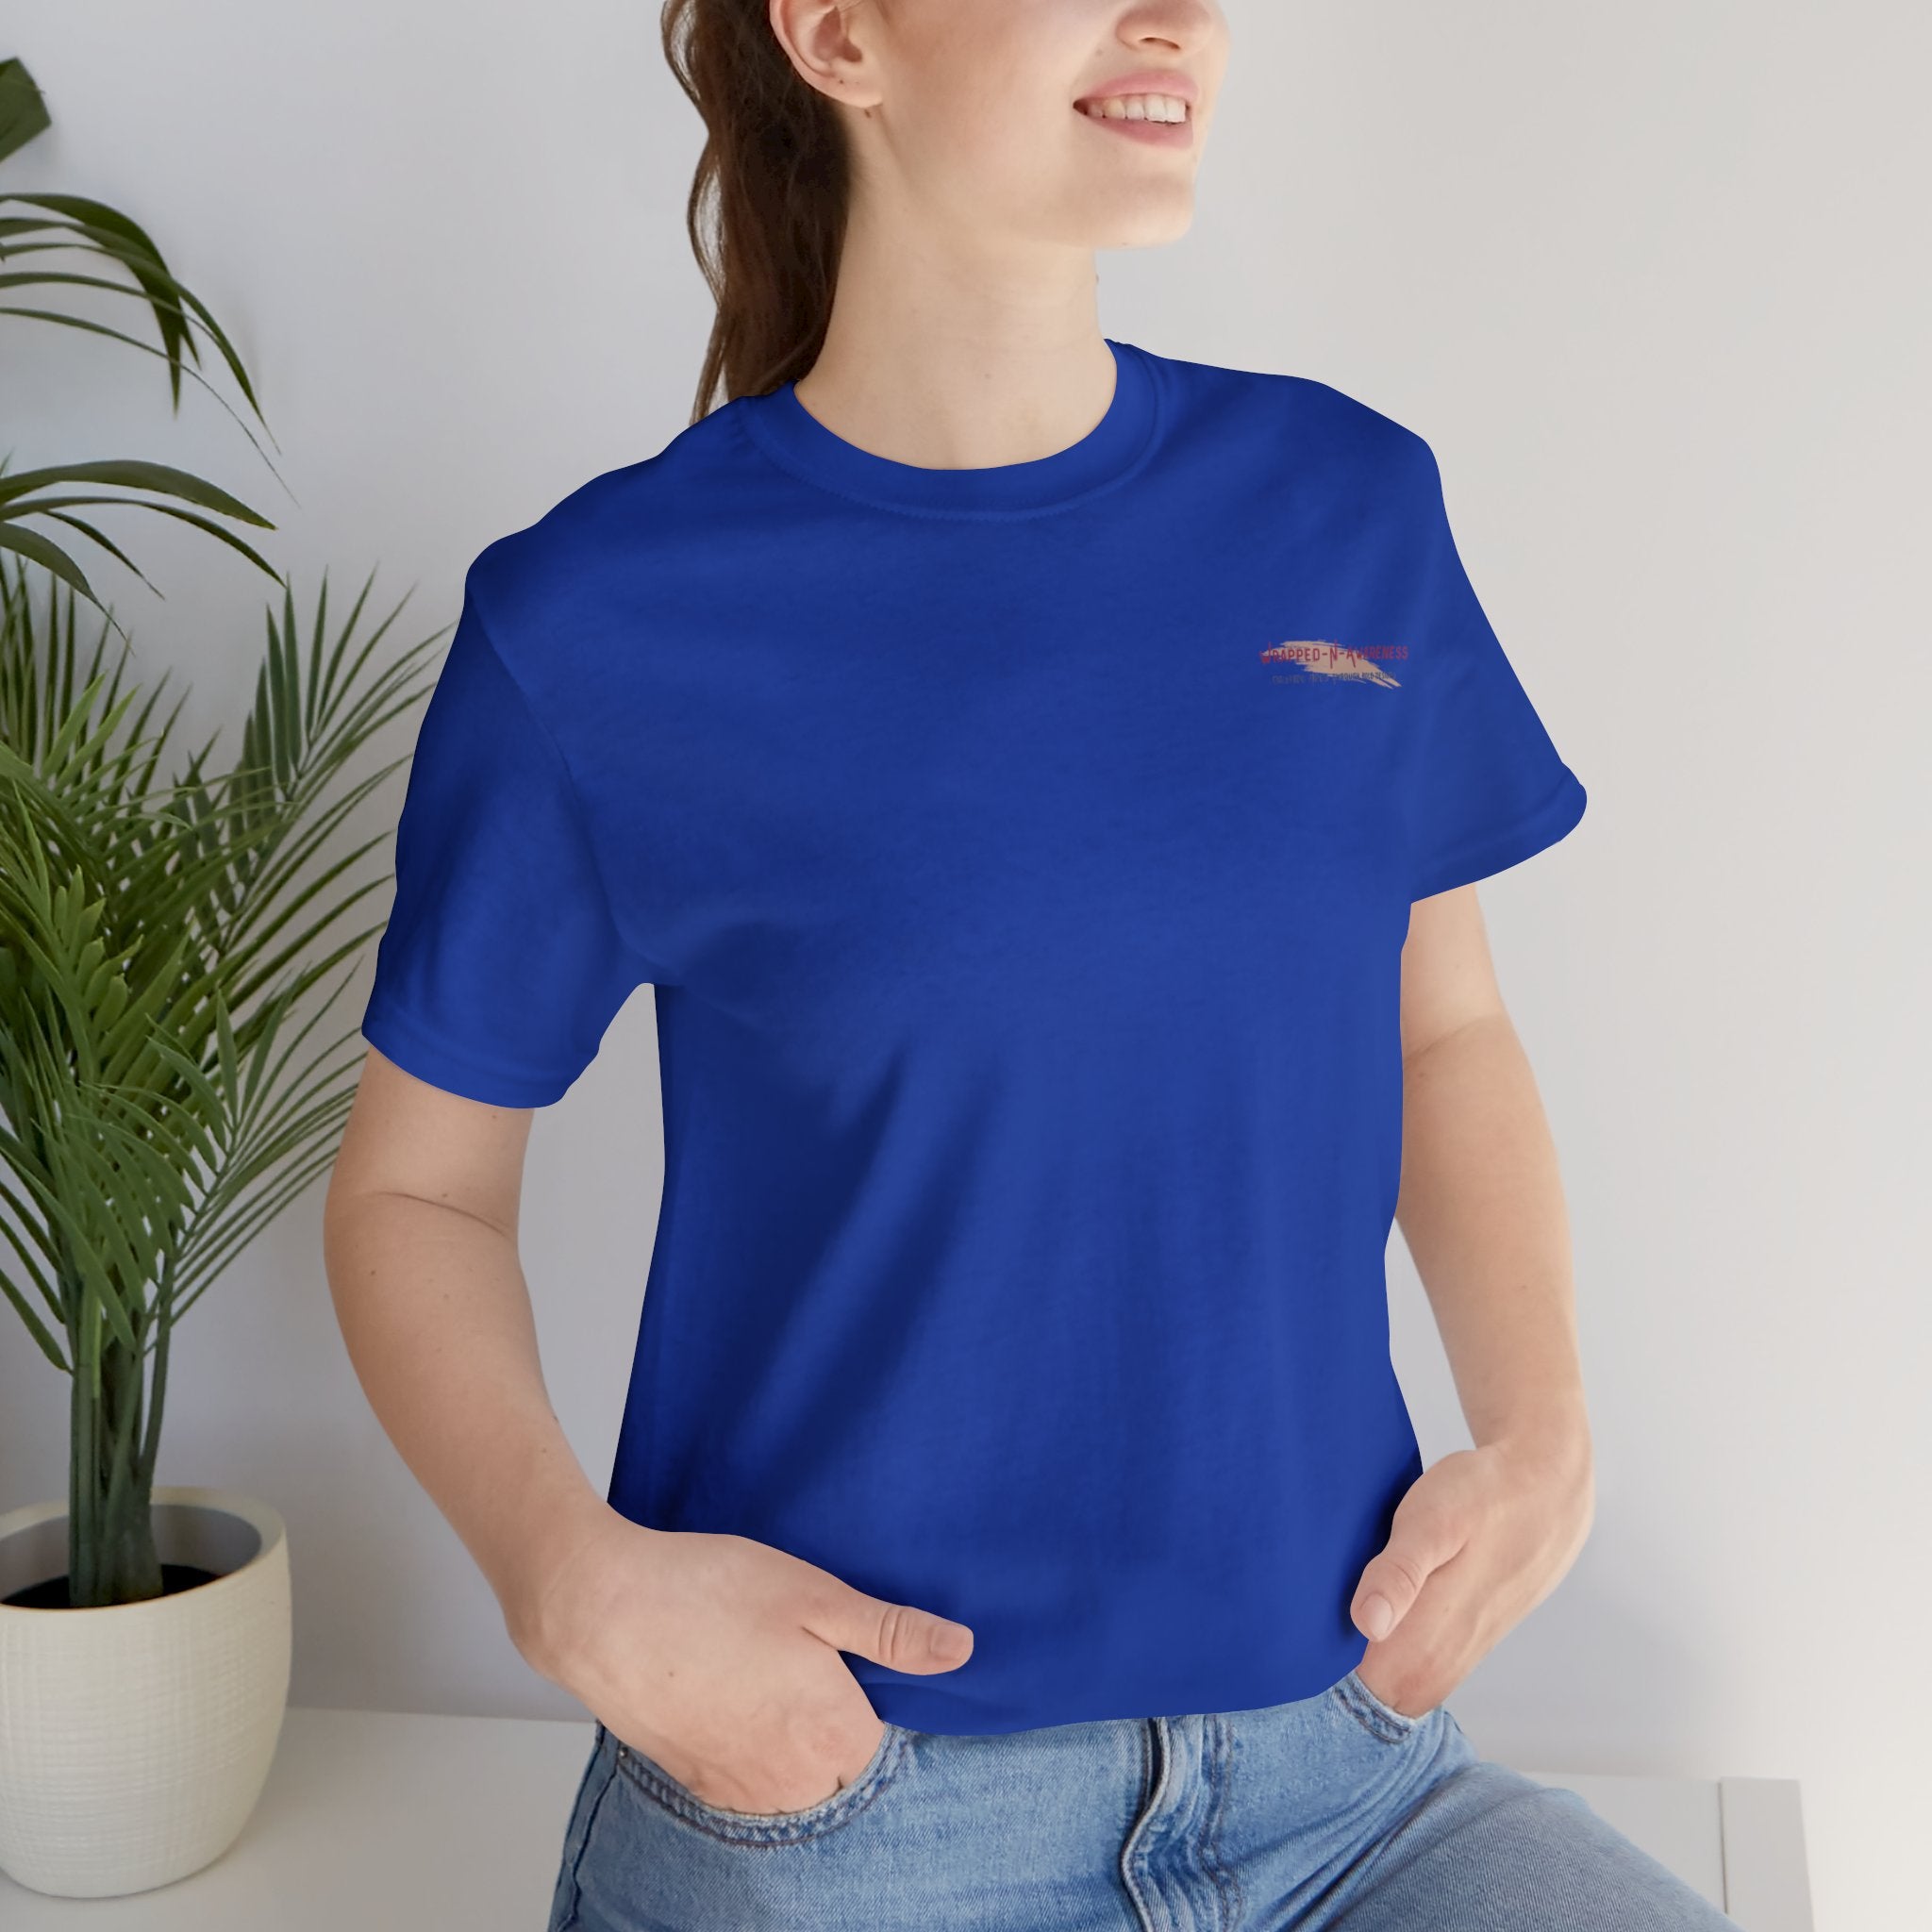 Progress Over Perfection Tee - Bella+Canvas 3001 Yellow Airlume Cotton Bella+Canvas 3001 Crew Neckline Jersey Short Sleeve Lightweight Fabric Mental Health Support Retail Fit Tear-away Label Tee Unisex Tee T-Shirt 14994965842837463253_2048 Printify